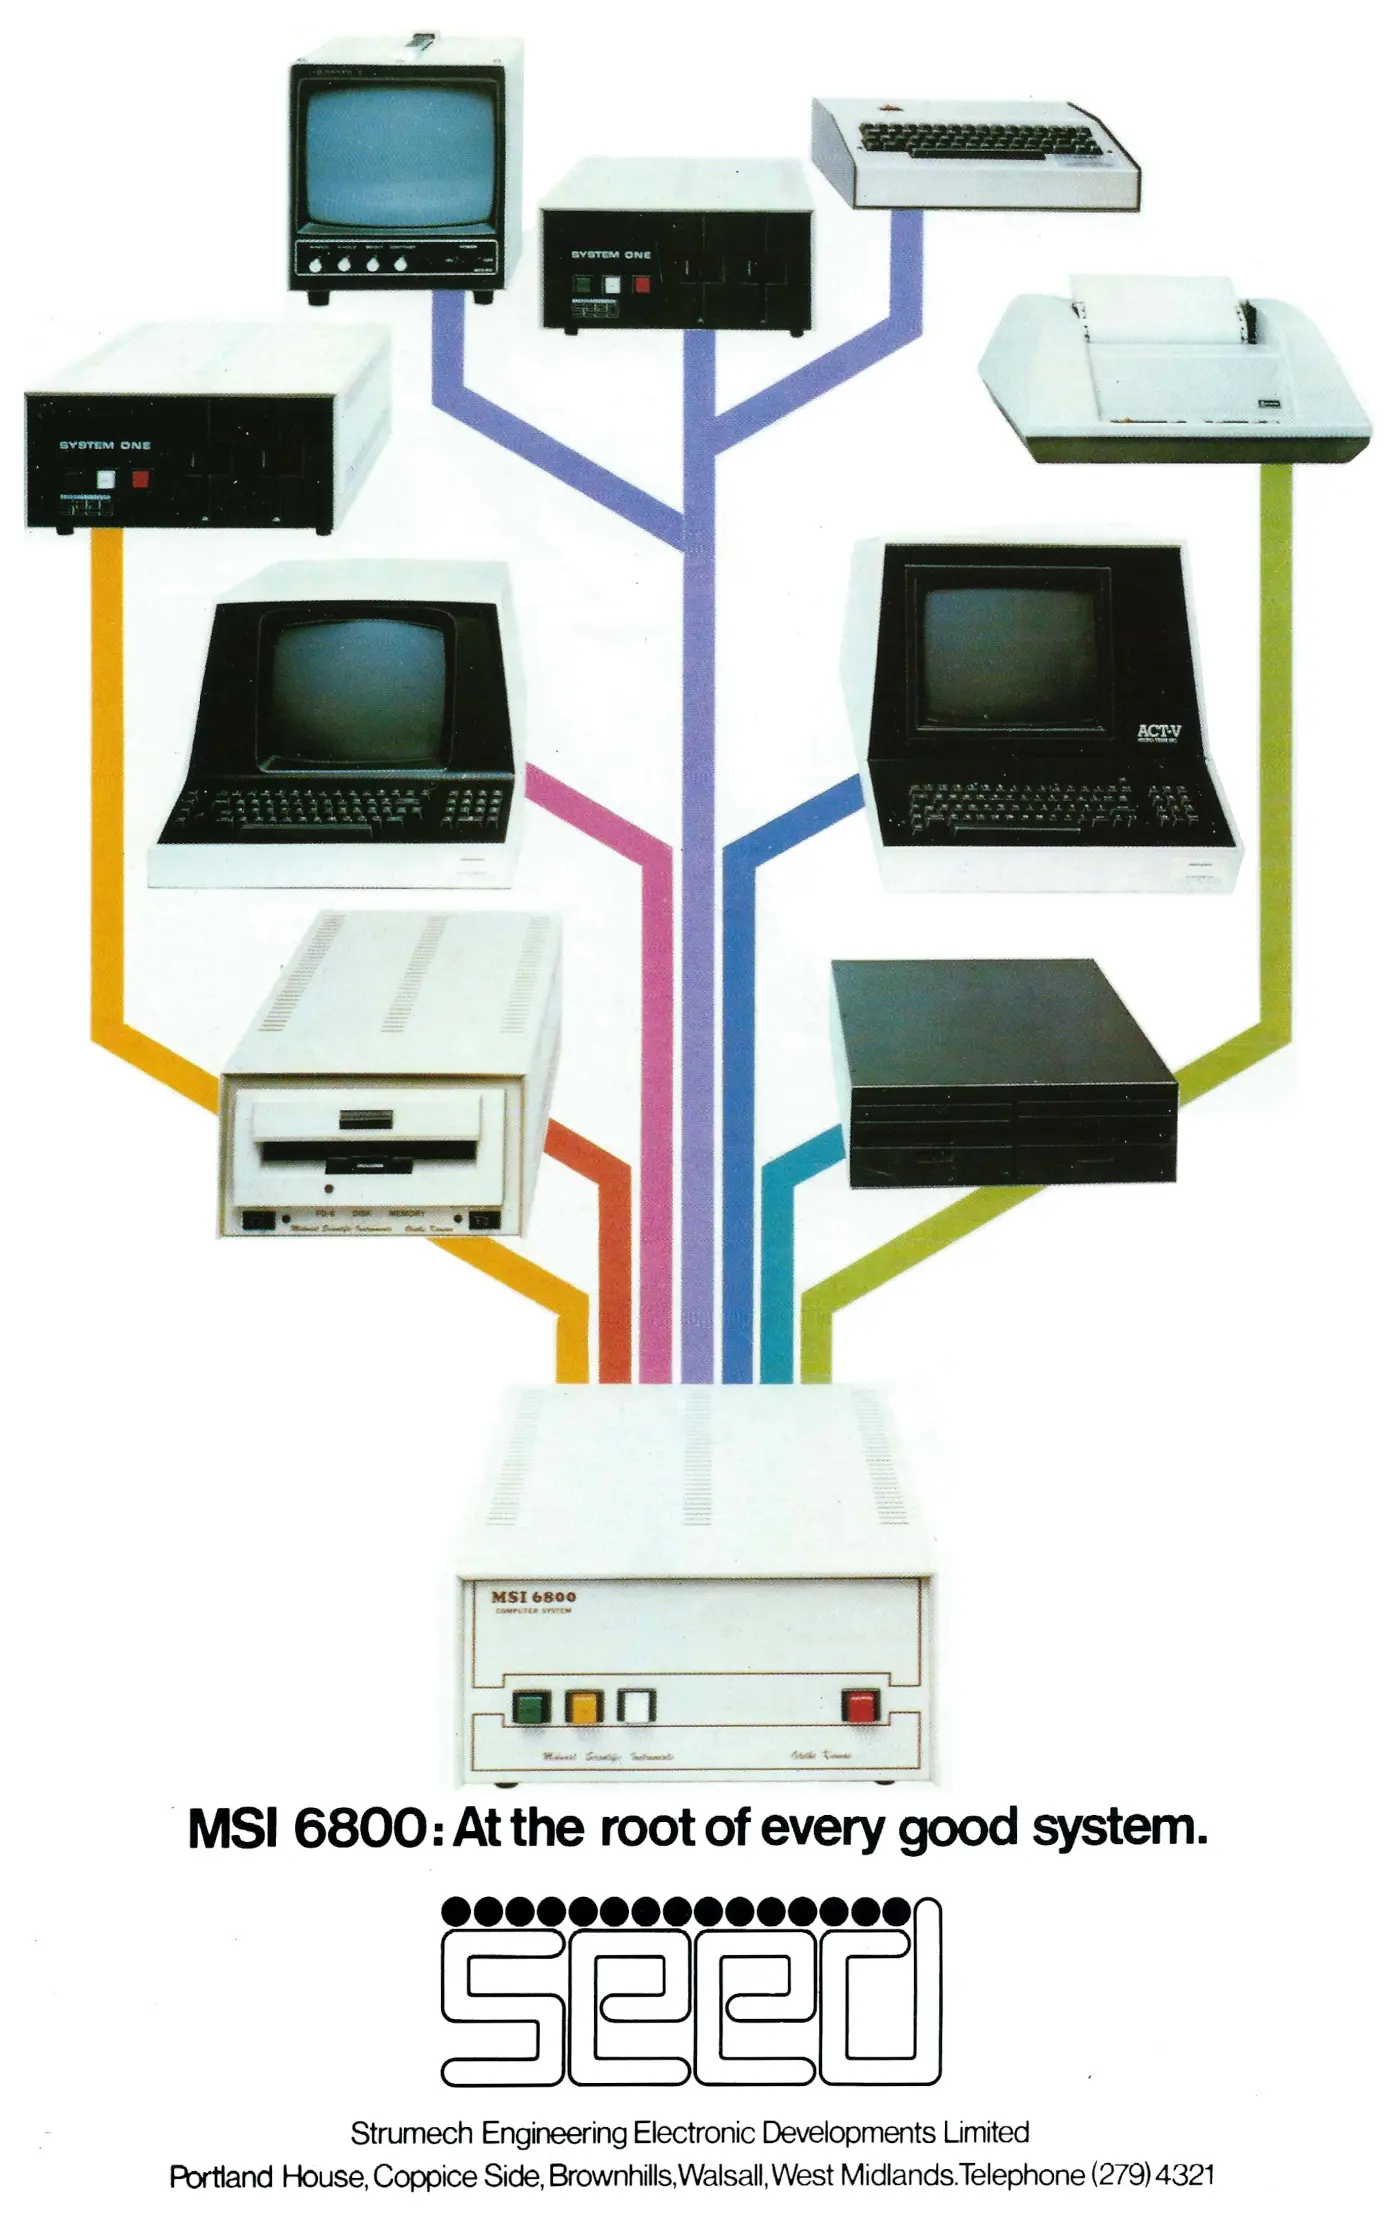 Midwest Scientific Instruments (MSI) Advert: MSI 6800 - At the root of every good system, from Personal Computer World, June 1979